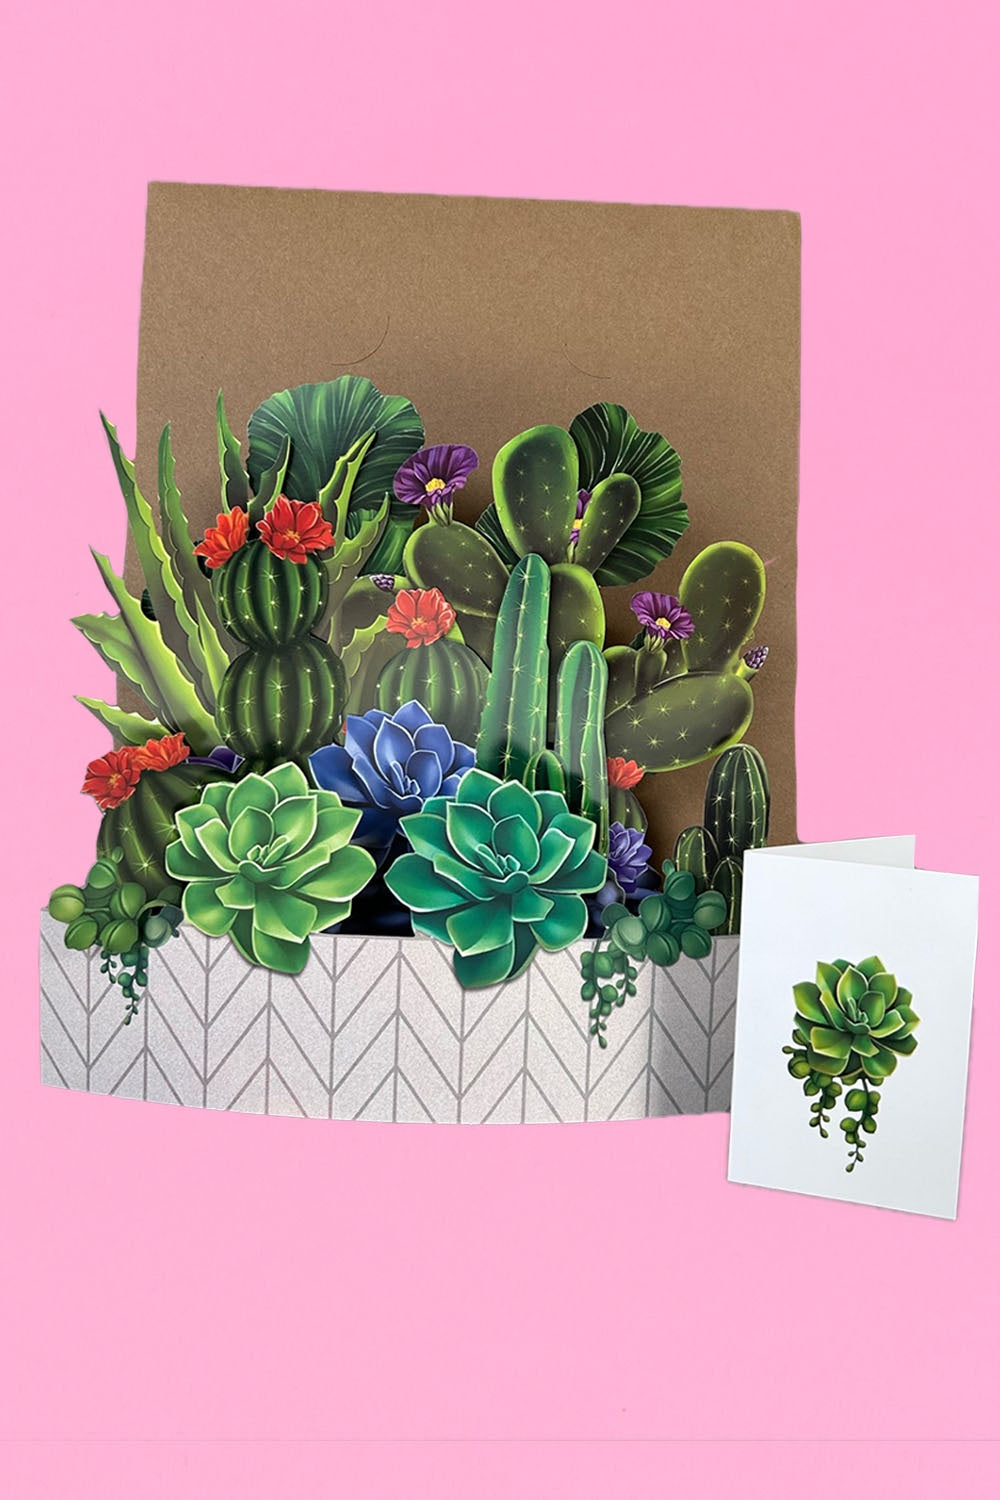 The Annah Stretton Pop Up card in the succulent design